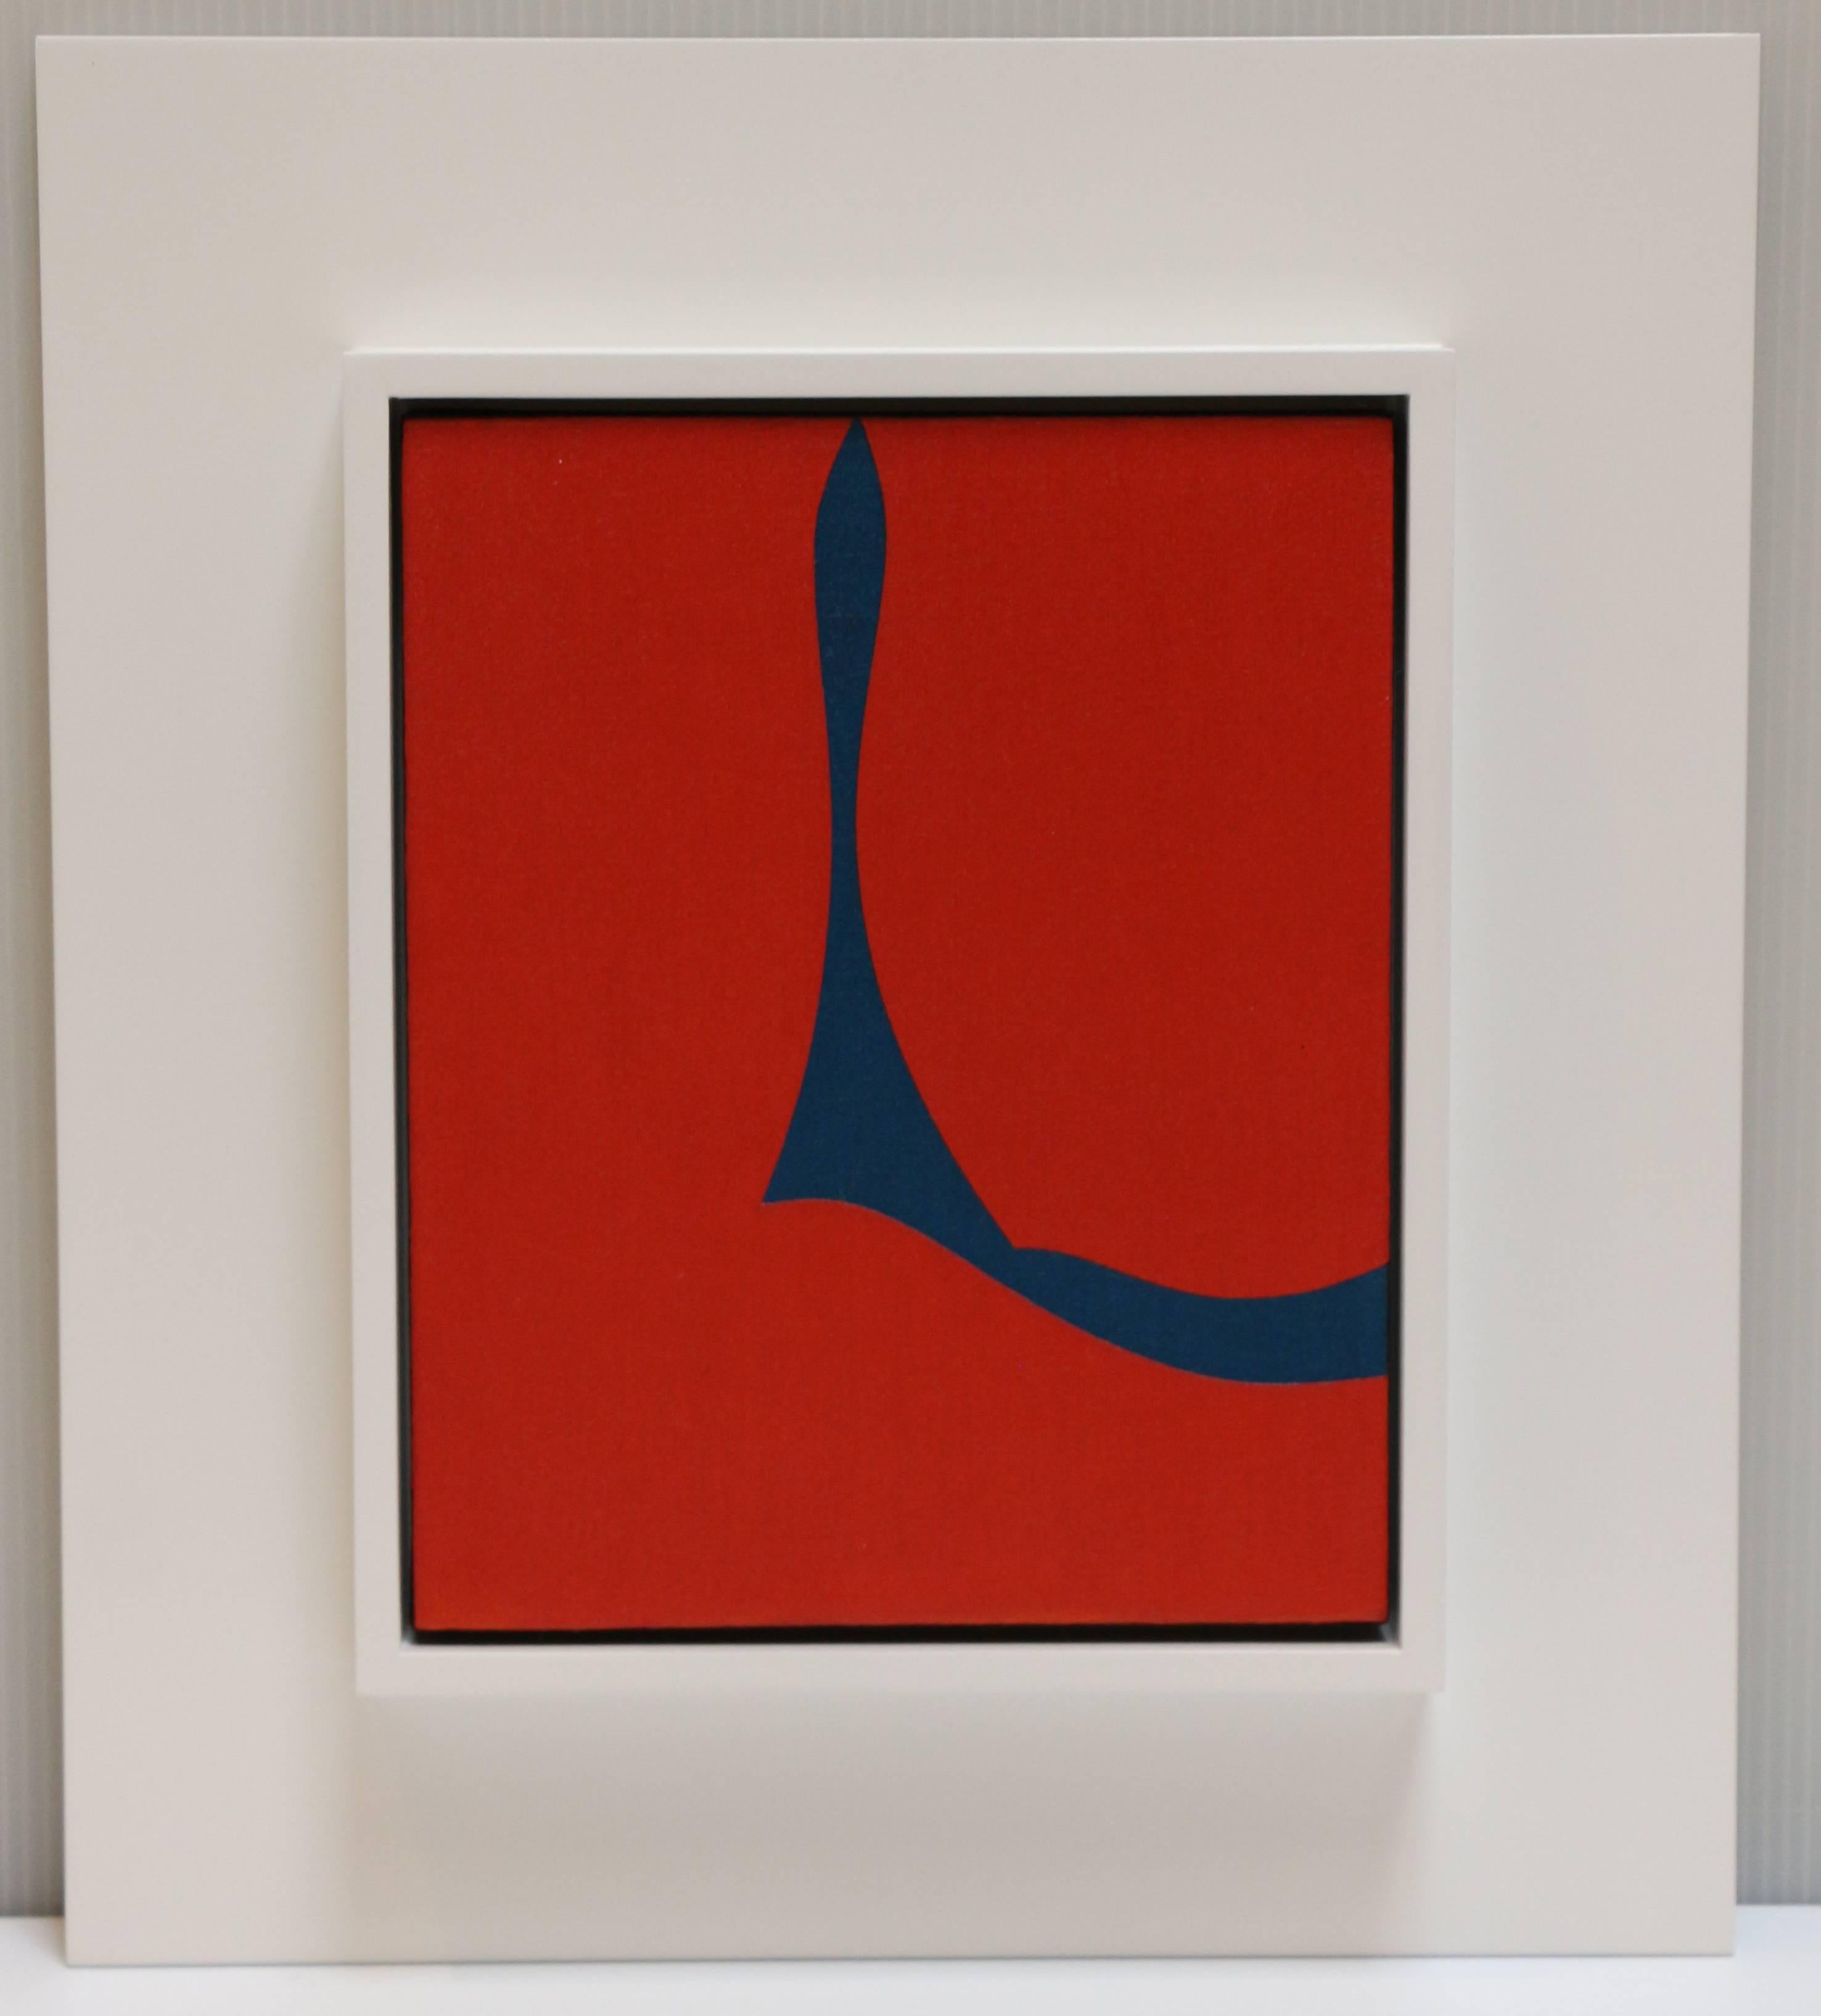 Untitled #38, hard edge geometric oil painting with red and blue colors  - Painting by Karl Benjamin